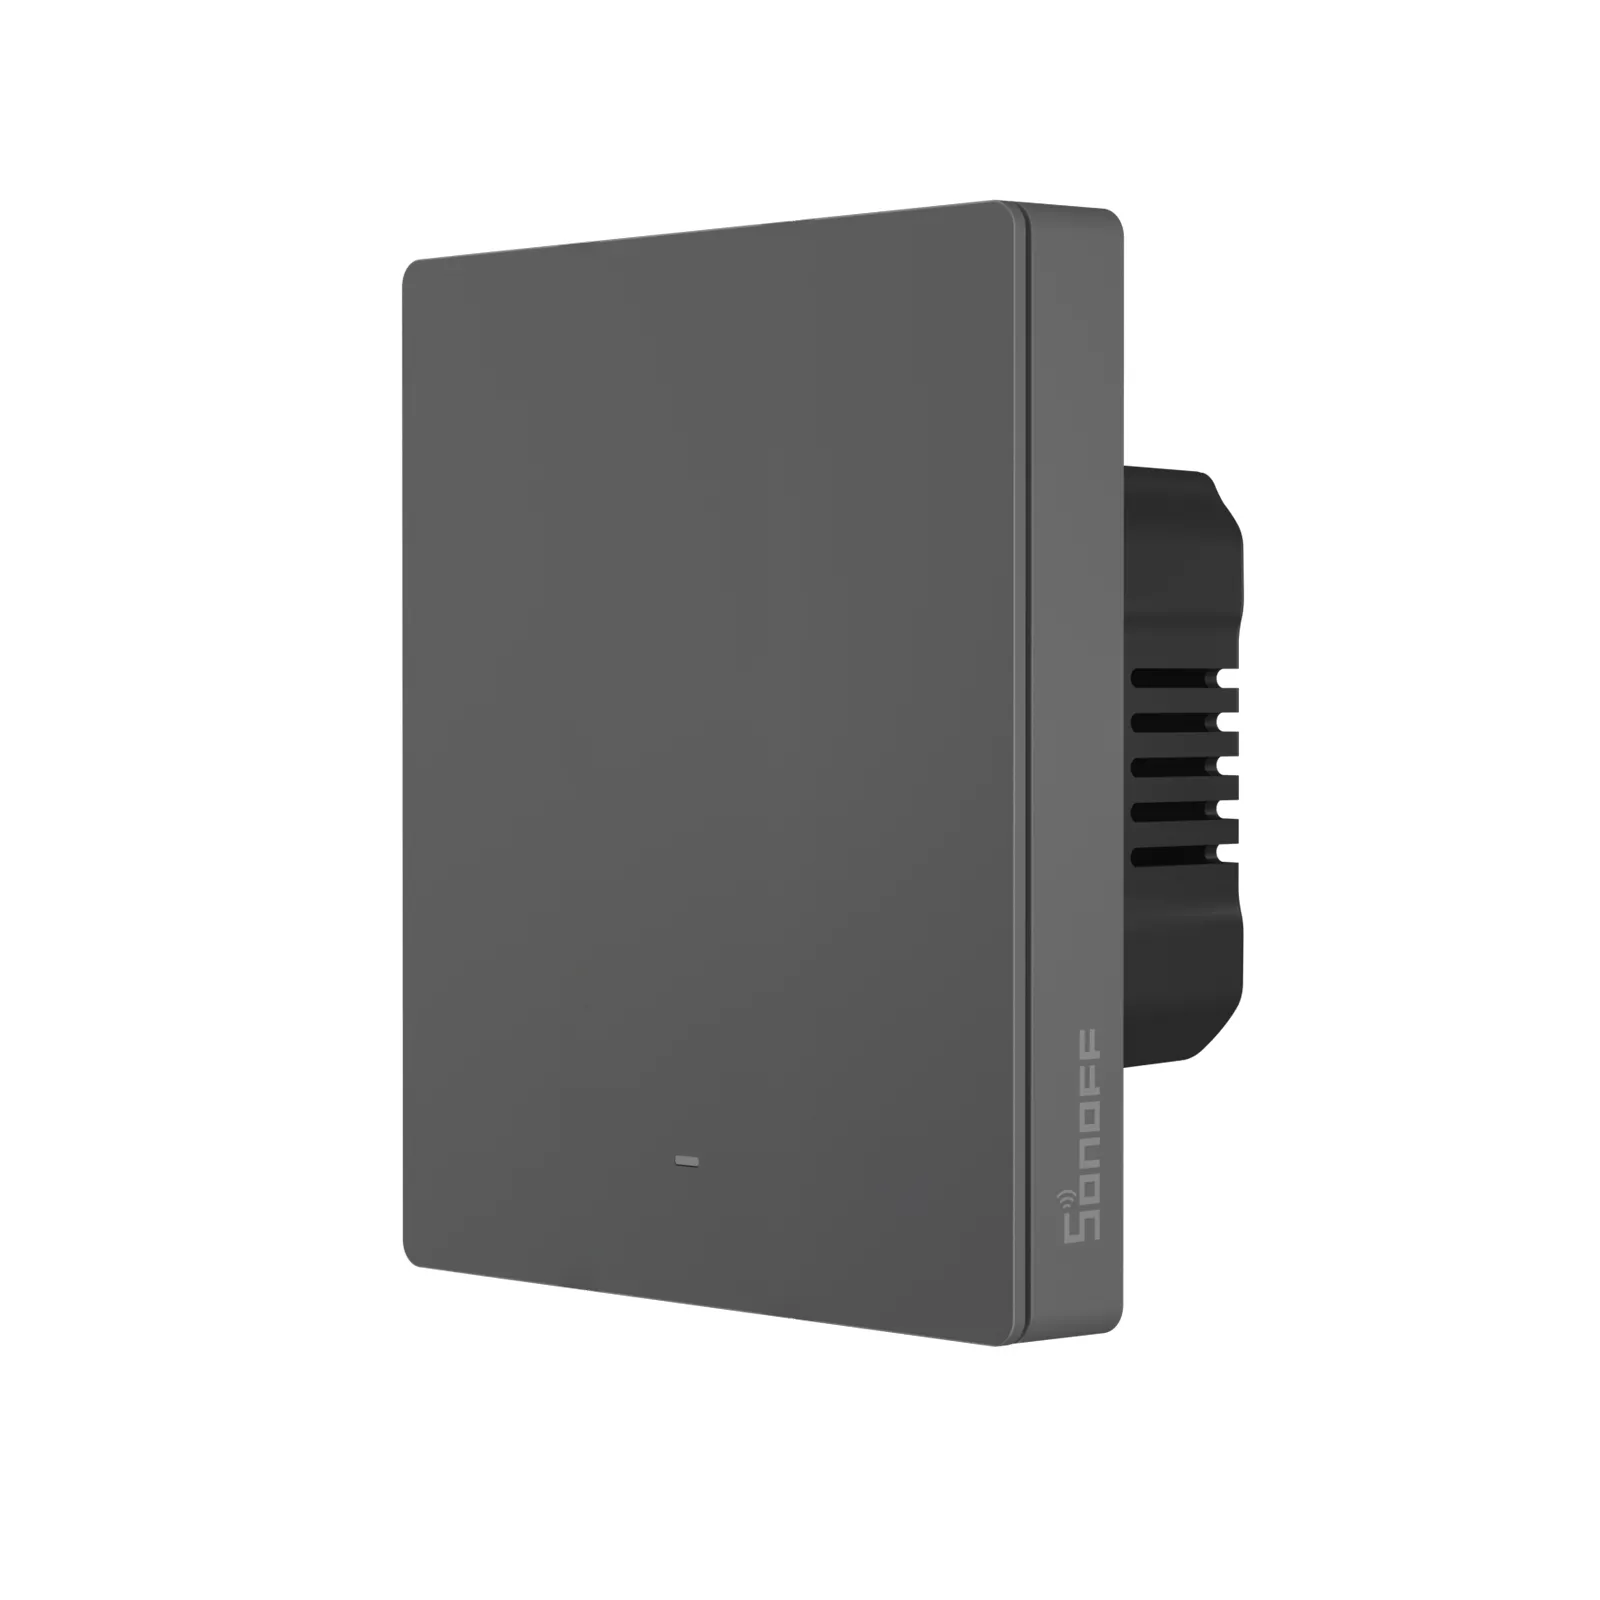 SONOFF SwitchMan Smart Wall Switch-M5 1